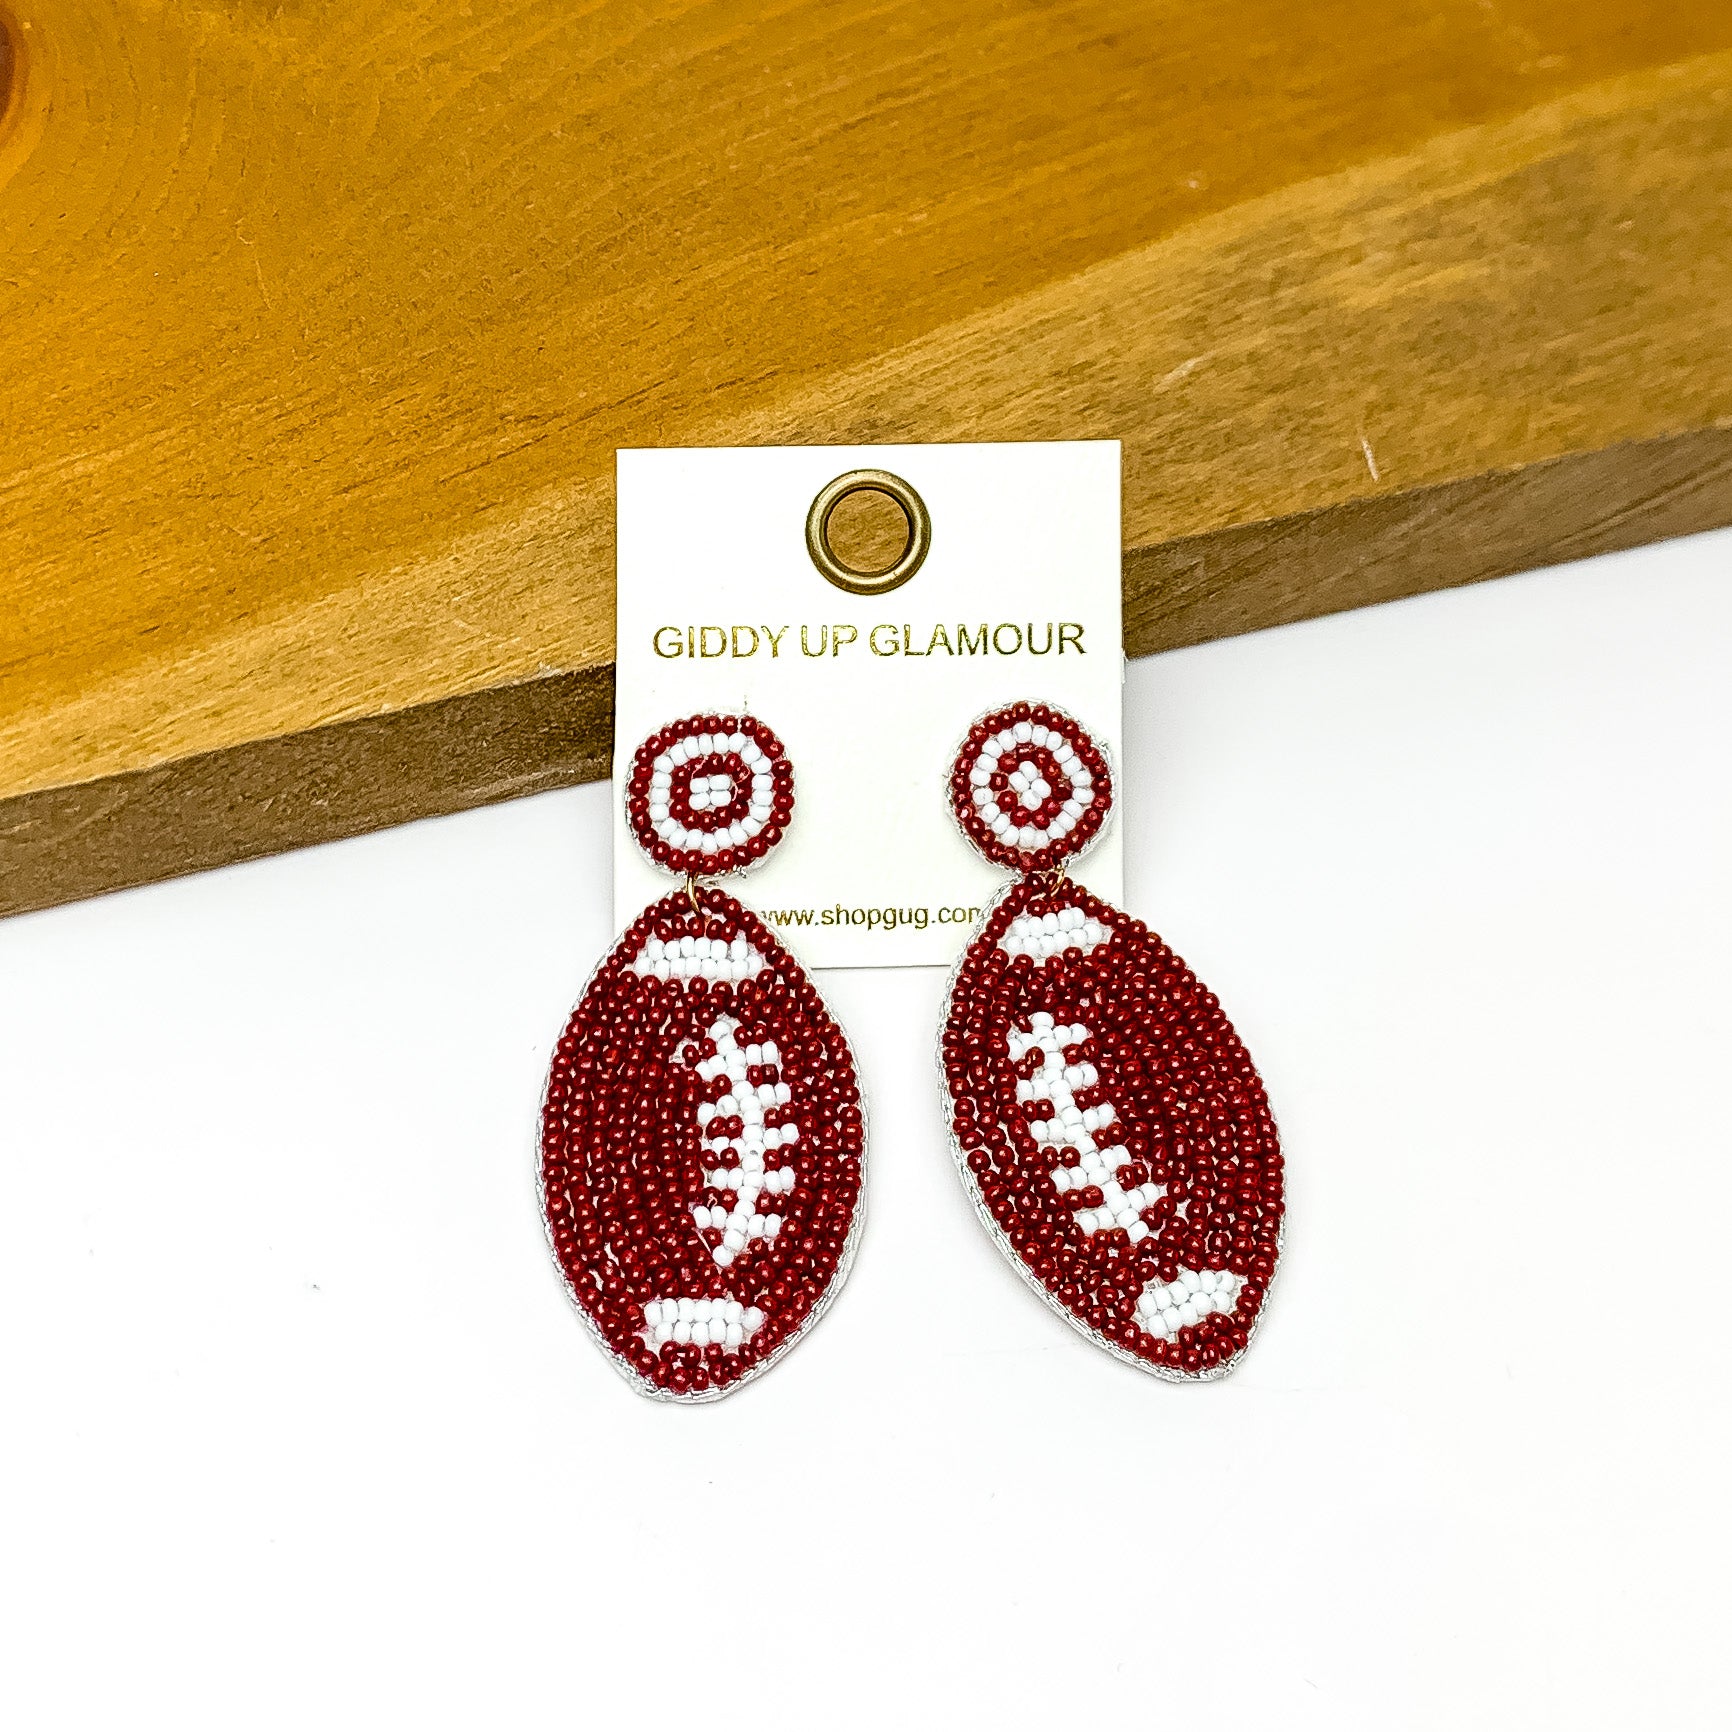 Football Post Beaded Earrings in Brown and White. Pictured on a white background with the earrings against a wood piece.